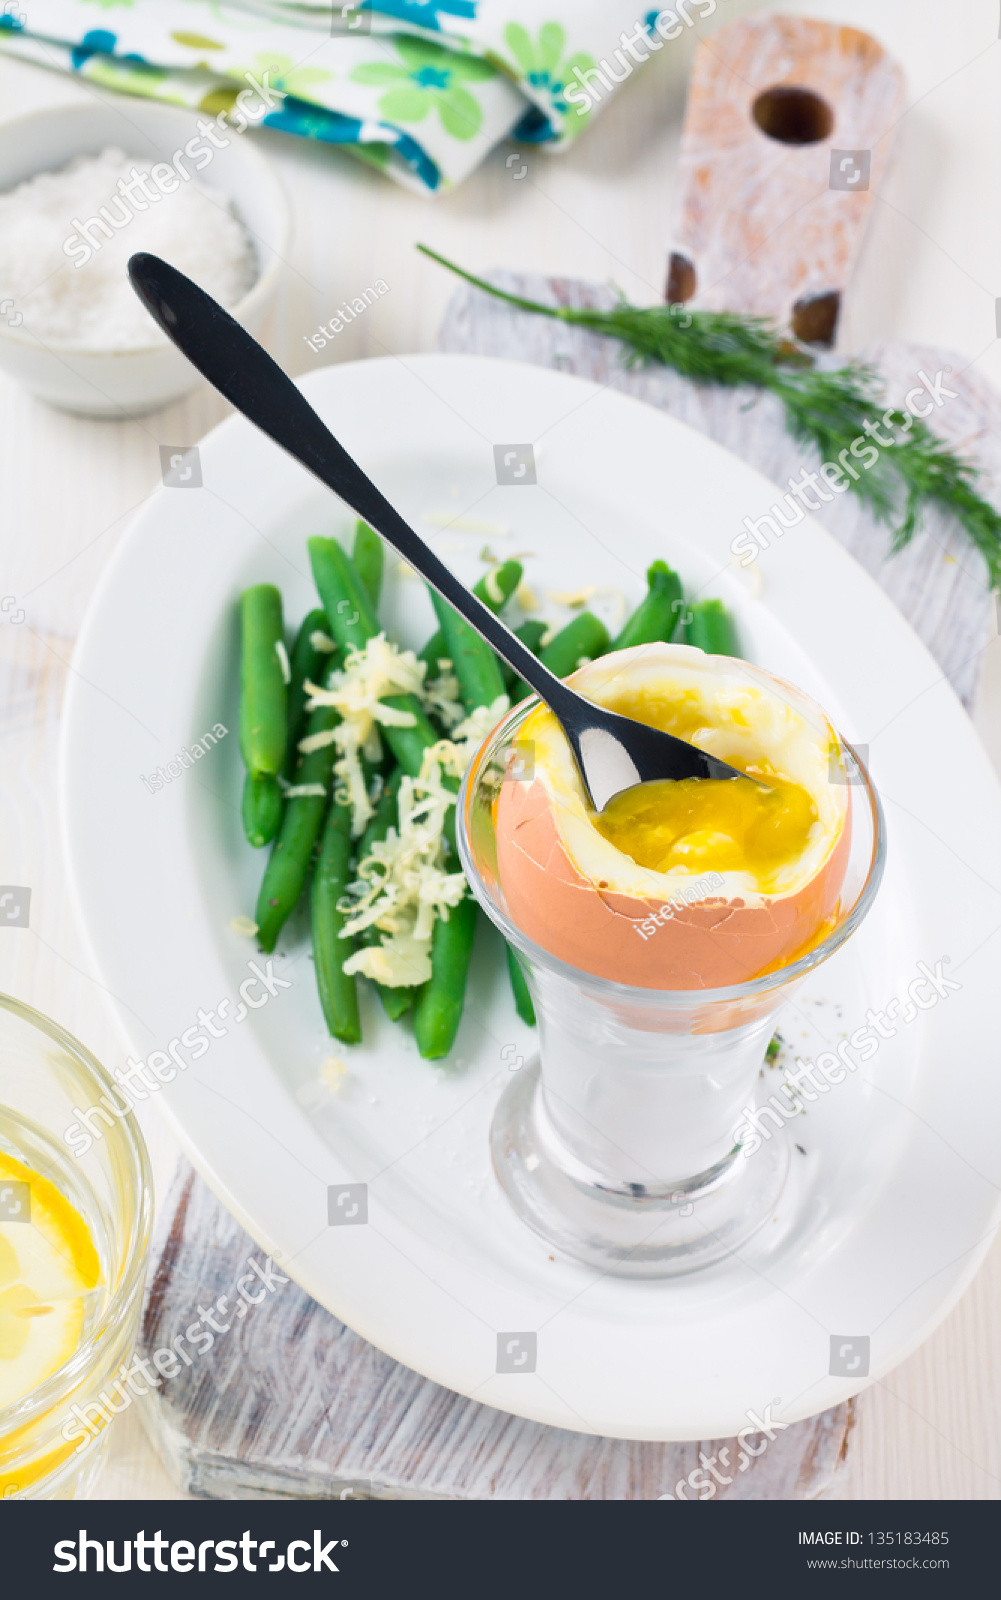 Healthy Breakfast With Boiled Eggs
 Healthy Breakfast With Boiled Egg And Ve ables Stock